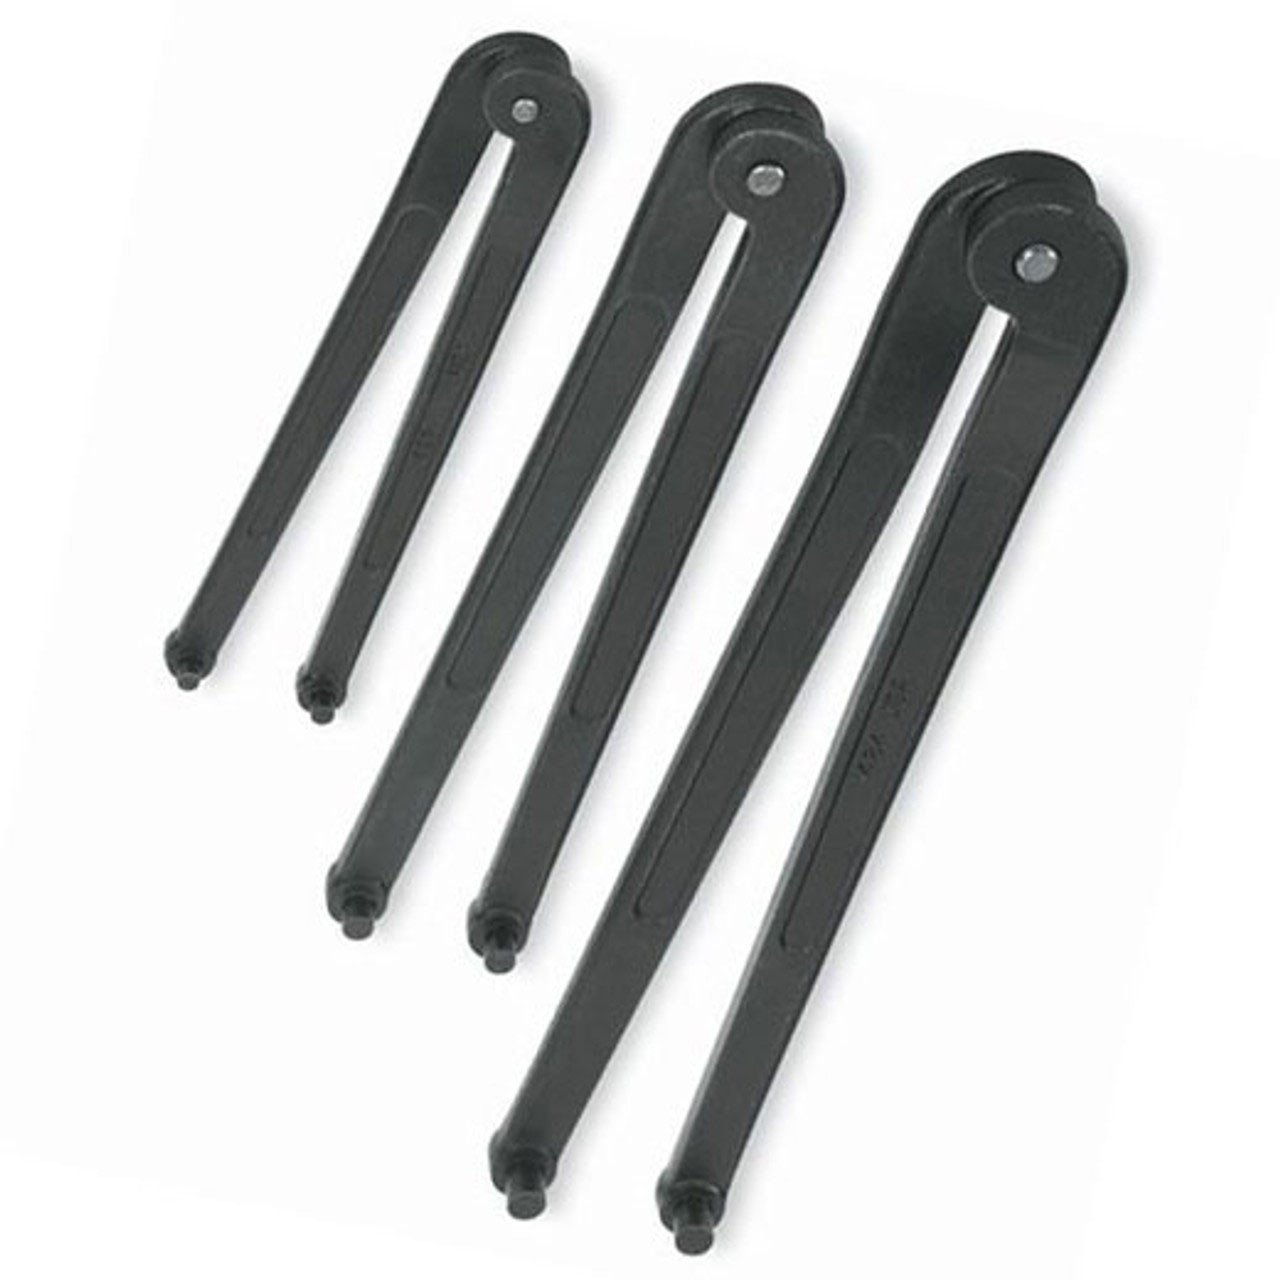 6 1/4"-10 3/8" Williams Black Adjustable Face Spanner Wrench Set 3 Pcs in Pouch - JHWWS-483